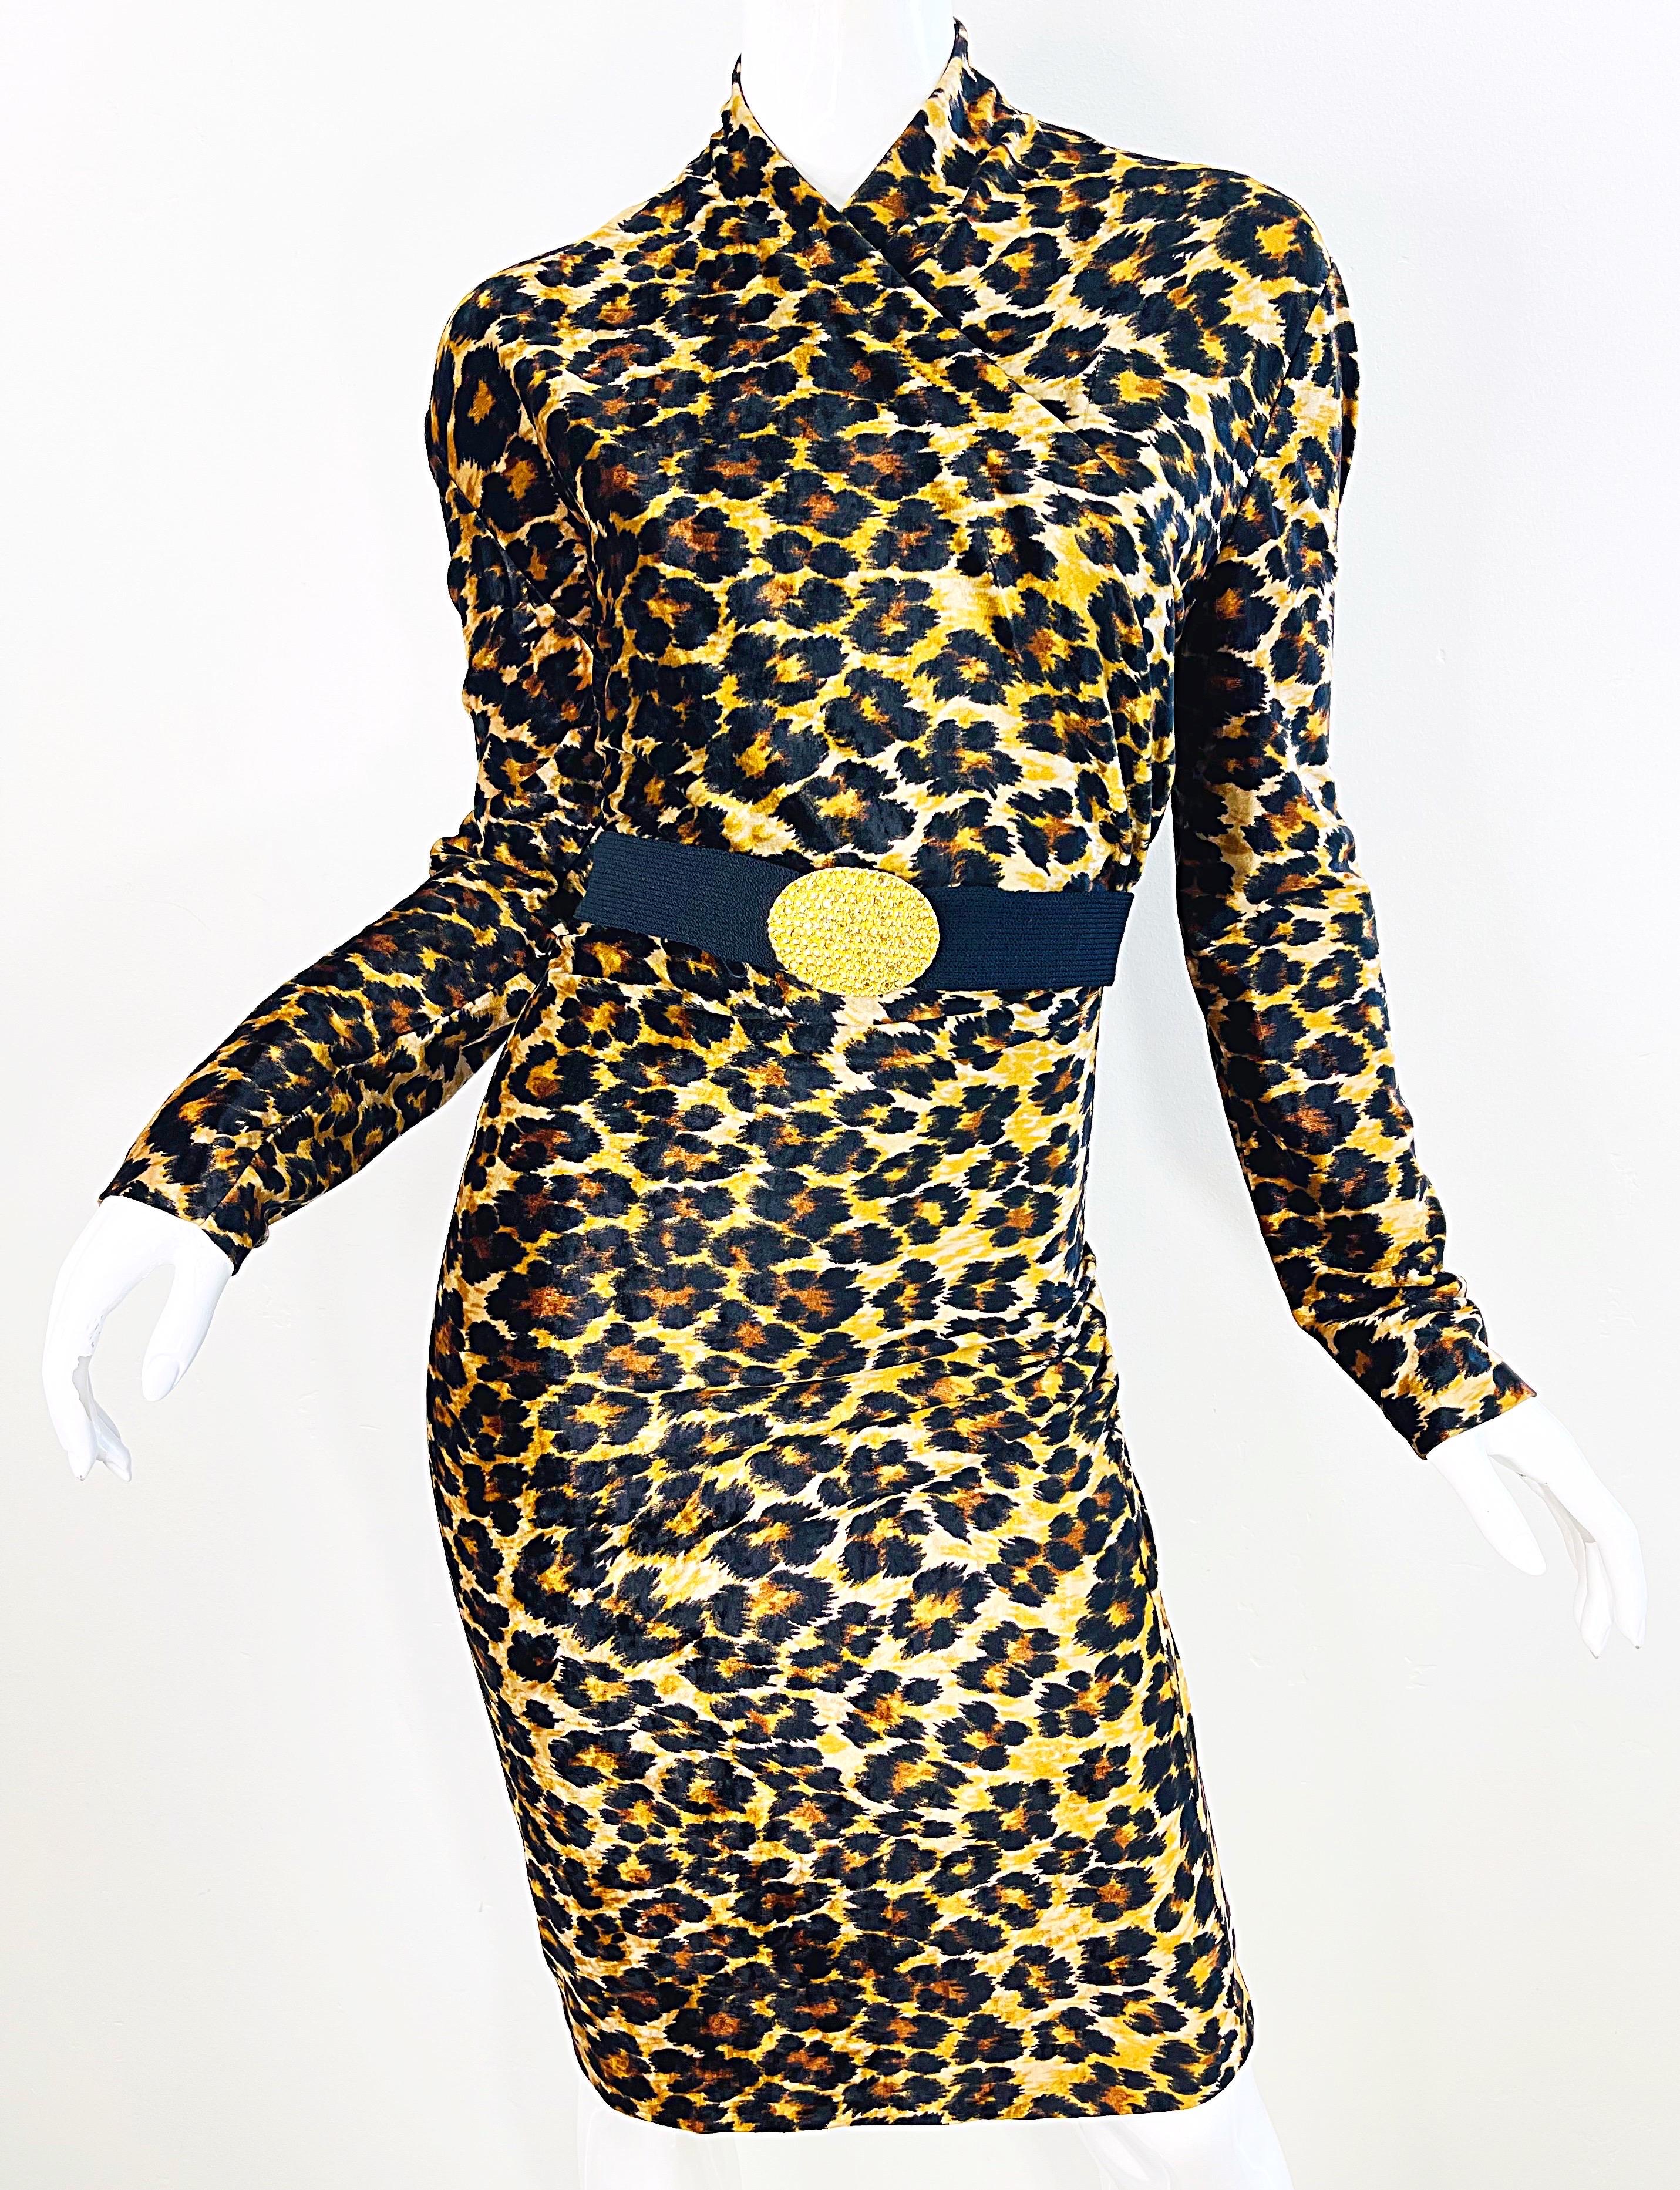 Documented Patrick Kelly 1989 Leopard Print Size Large Velour Vintage Dress 80s In Excellent Condition For Sale In San Diego, CA